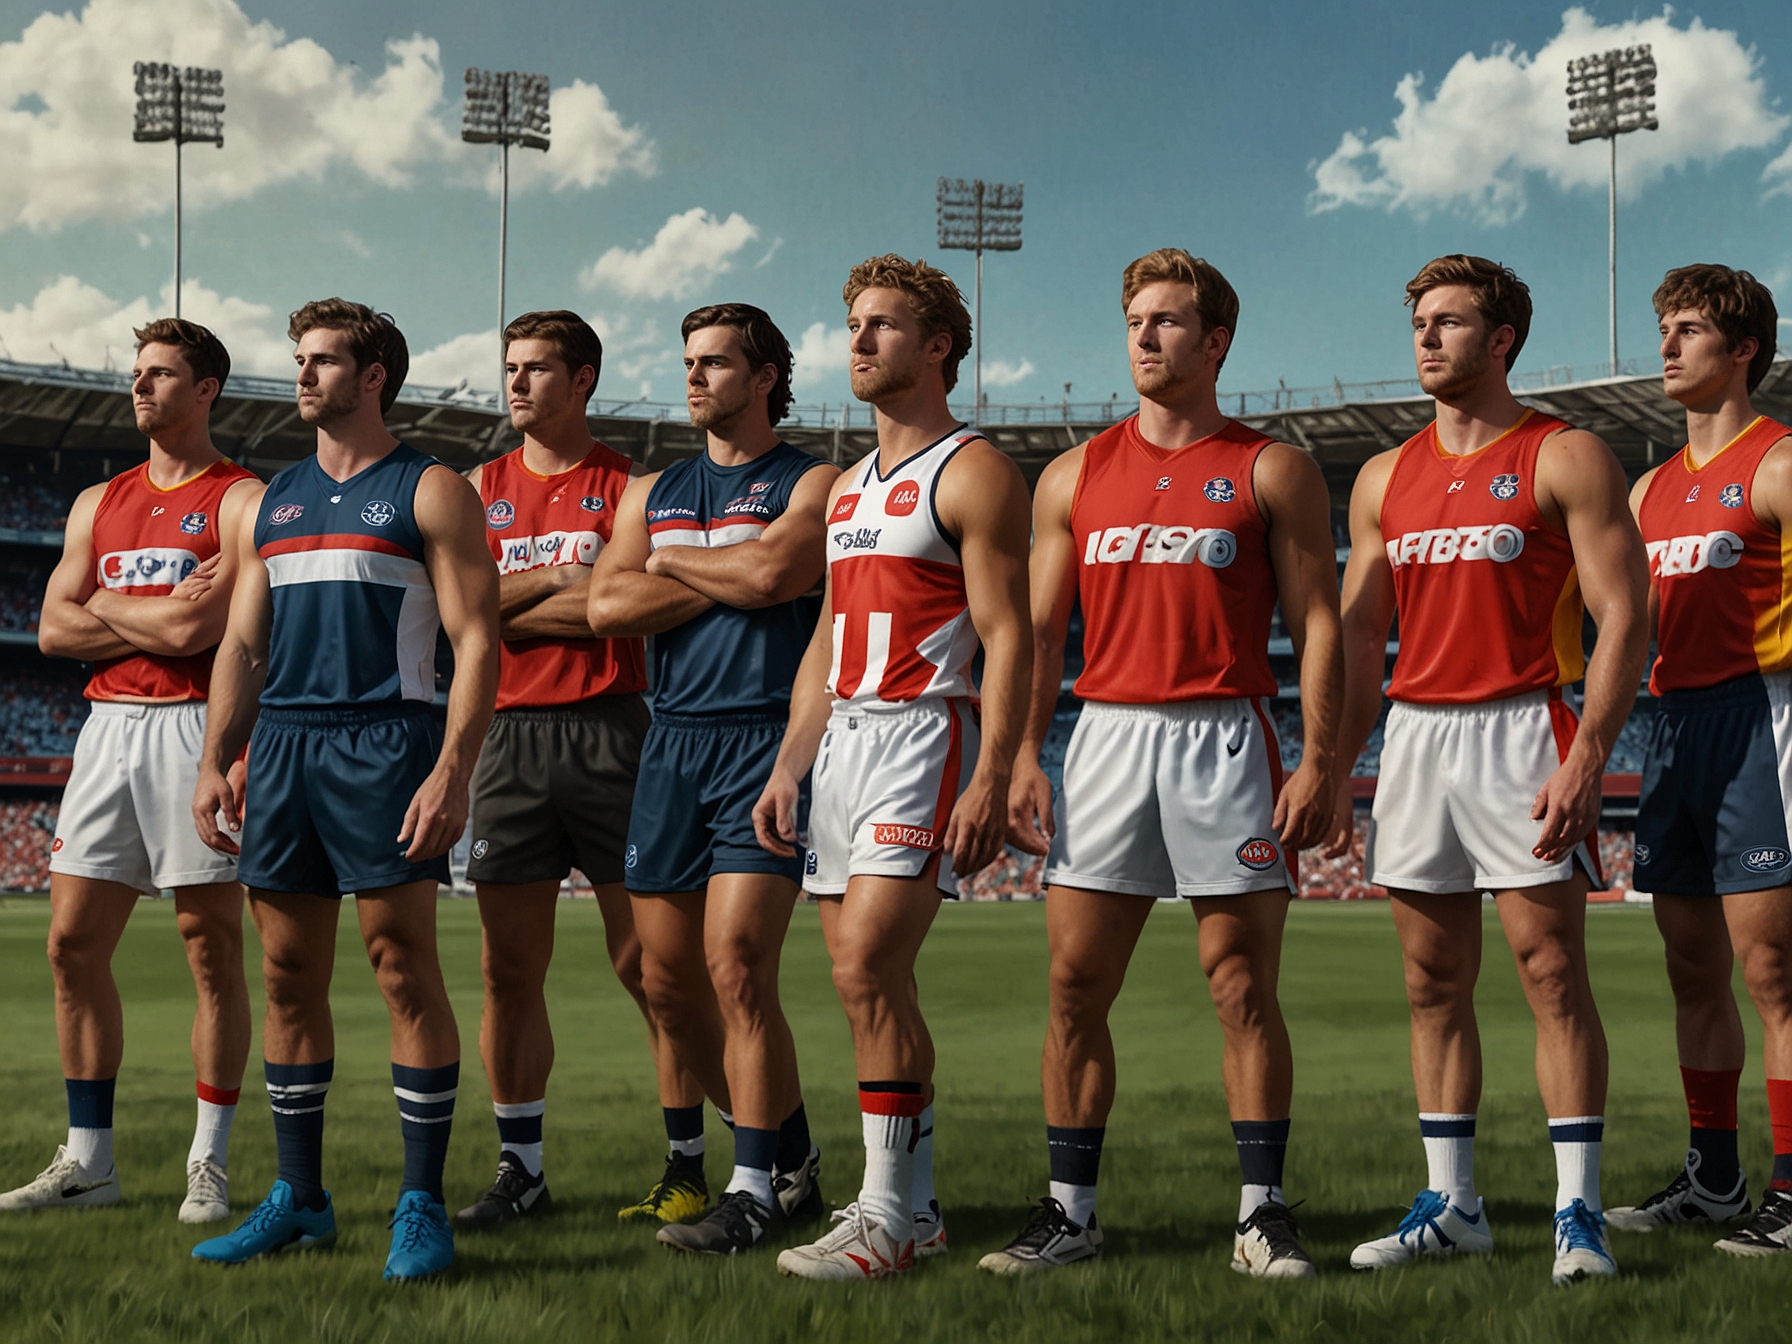 An image of AFL players on the field, highlighting the focus on drug testing and integrity in the sport. The recent findings on 'off-the-books' drug tests emphasize the need for transparency.